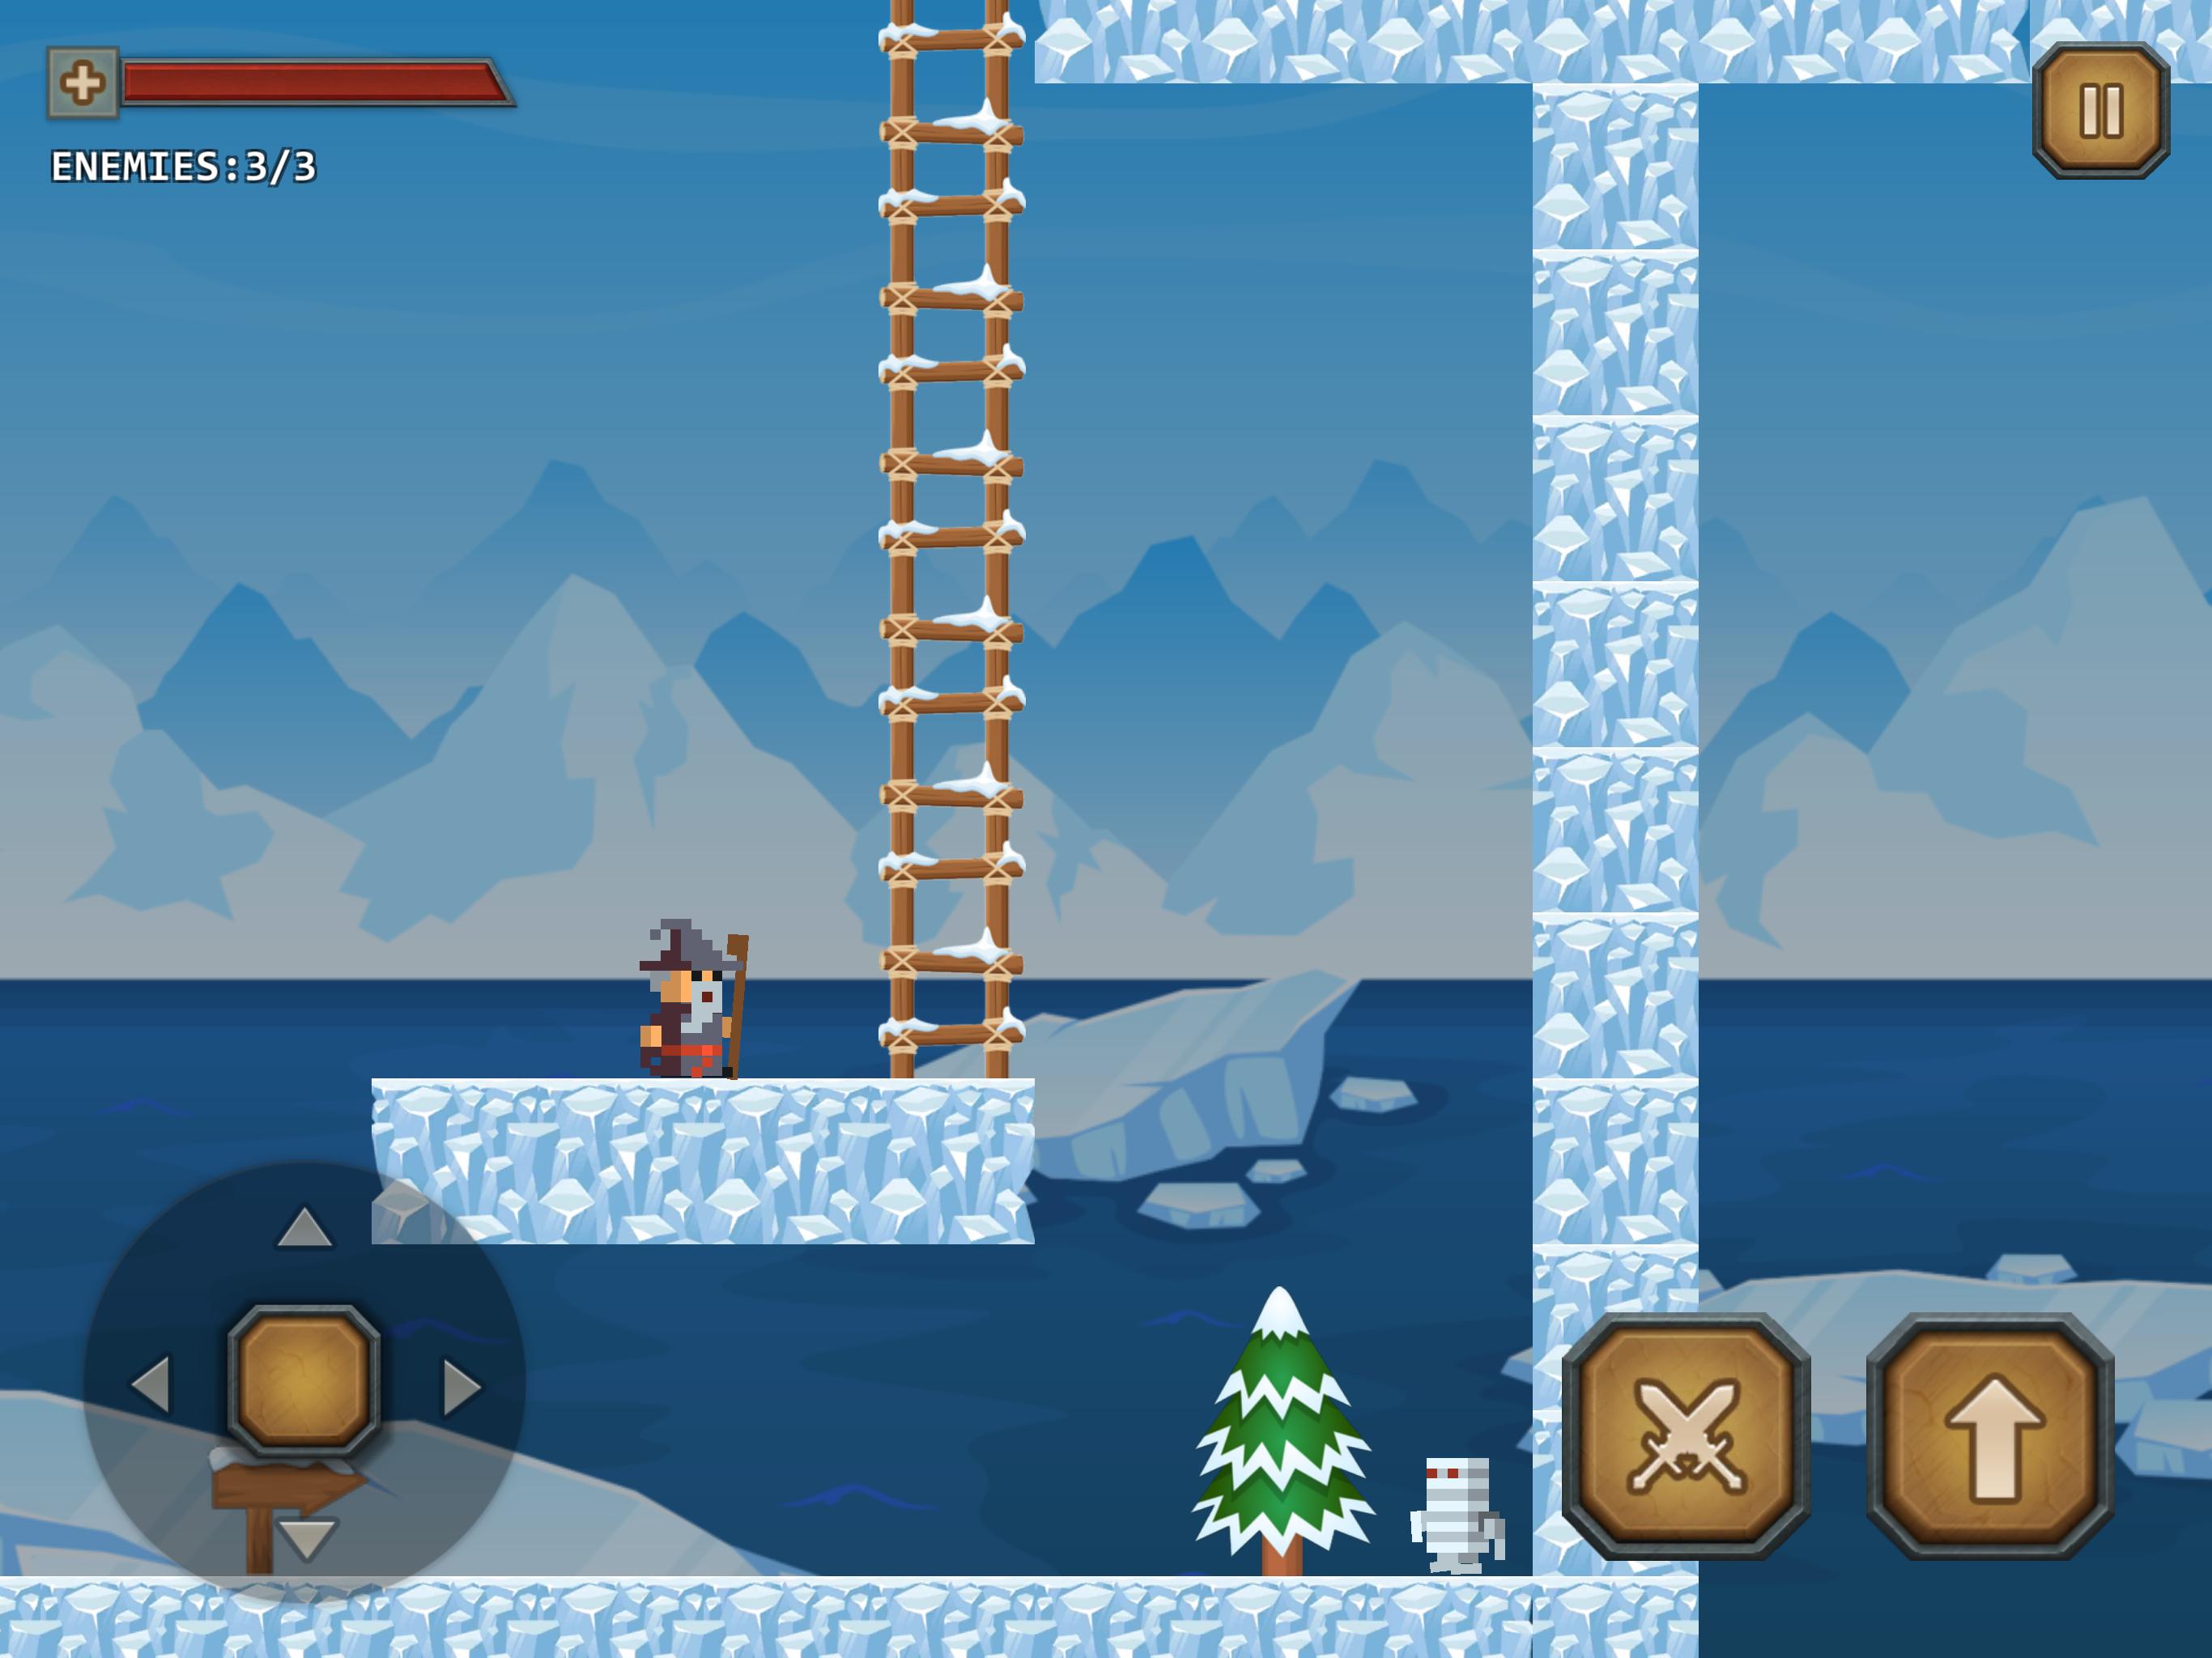 Epic Game Maker Create and Share Your Levels 1.9 Screenshot 10